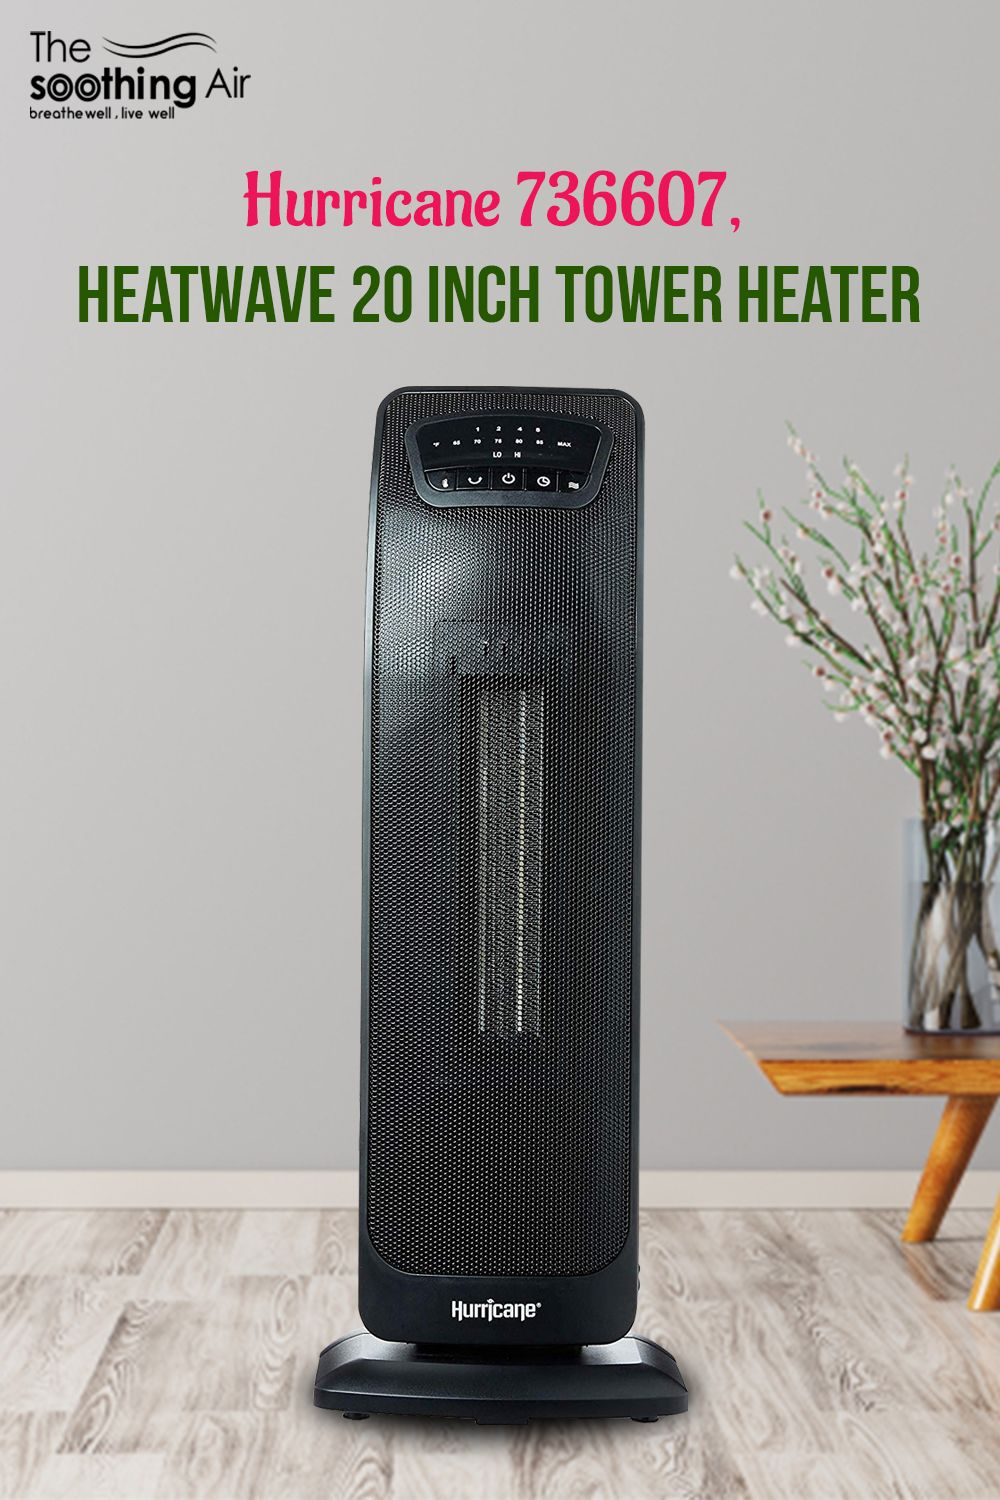 Top 10 Fan Room Heaters Feb 2020 Reviews And Buyers intended for dimensions 1000 X 1500